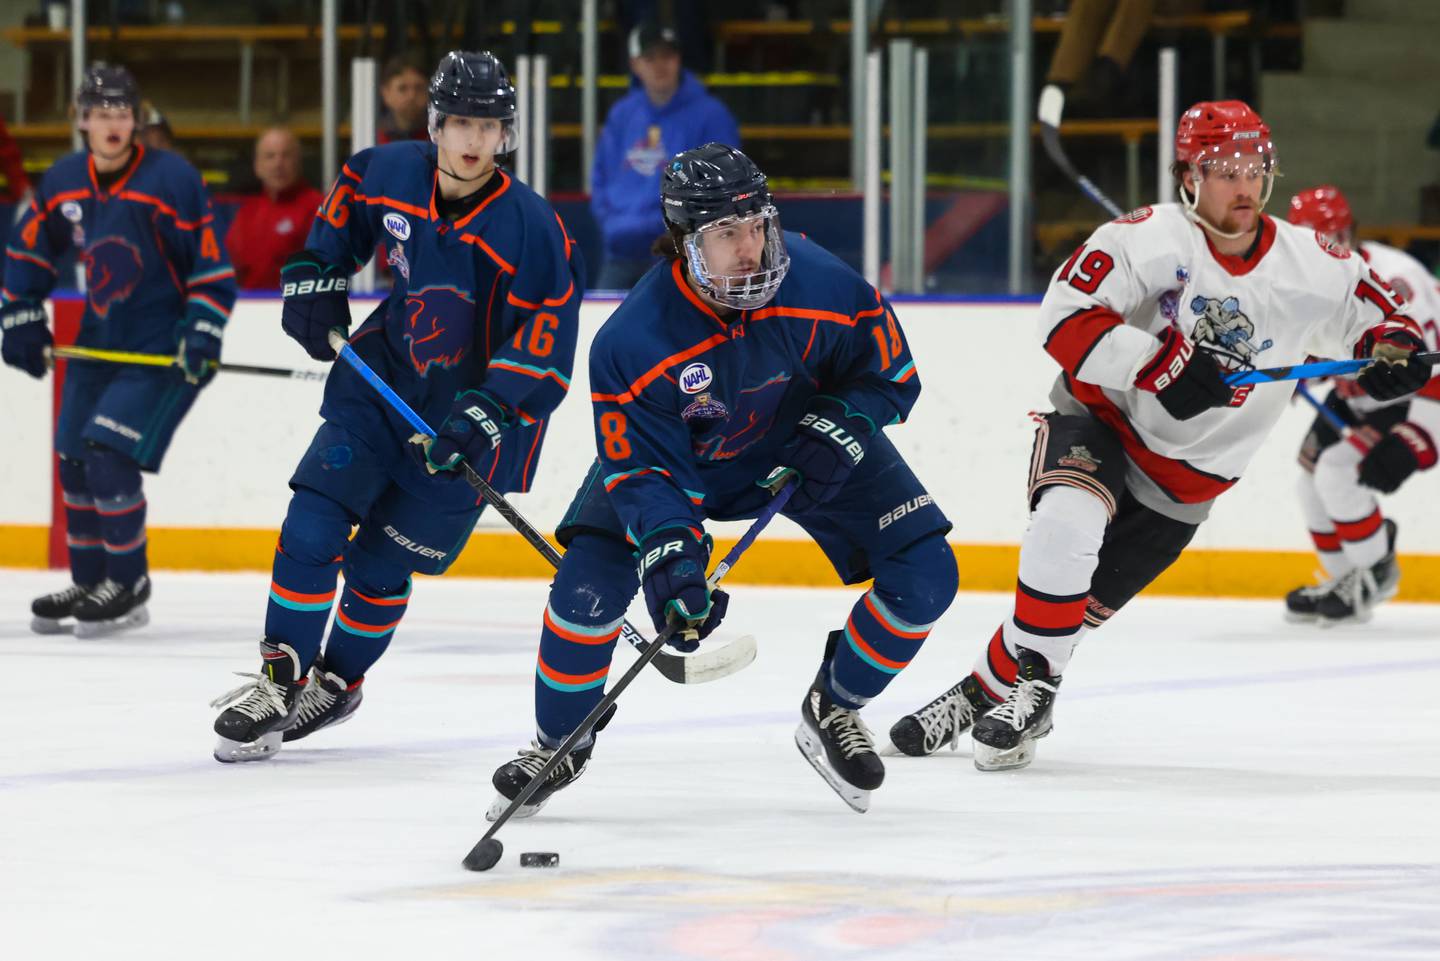 Anchorage Wolverines play New Jersey in Robertson Cup